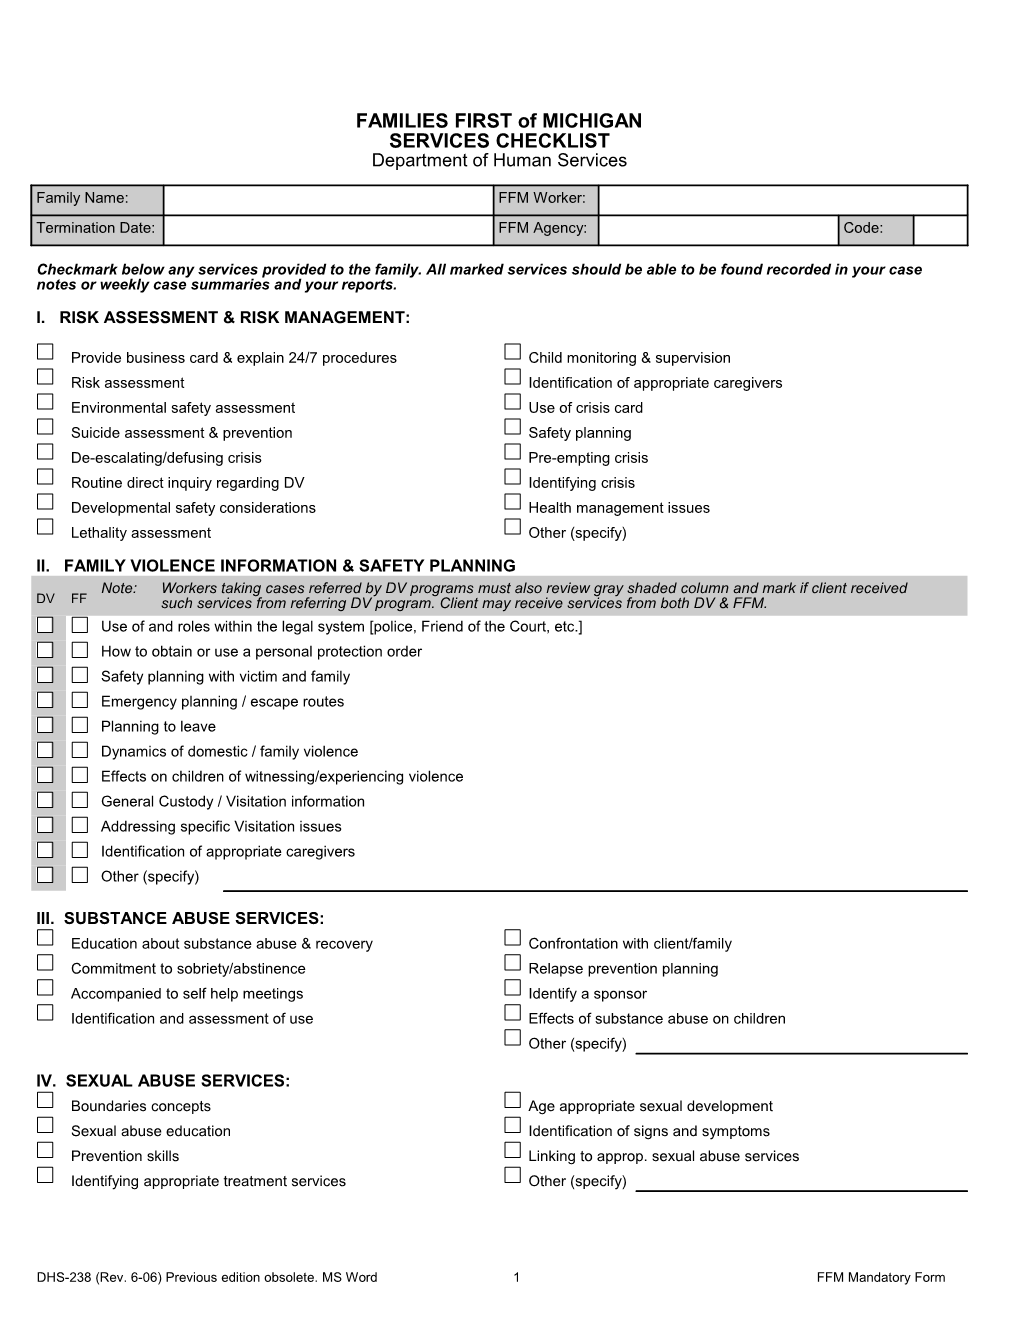 DHS-238, Families First of Michigan Services Checklist